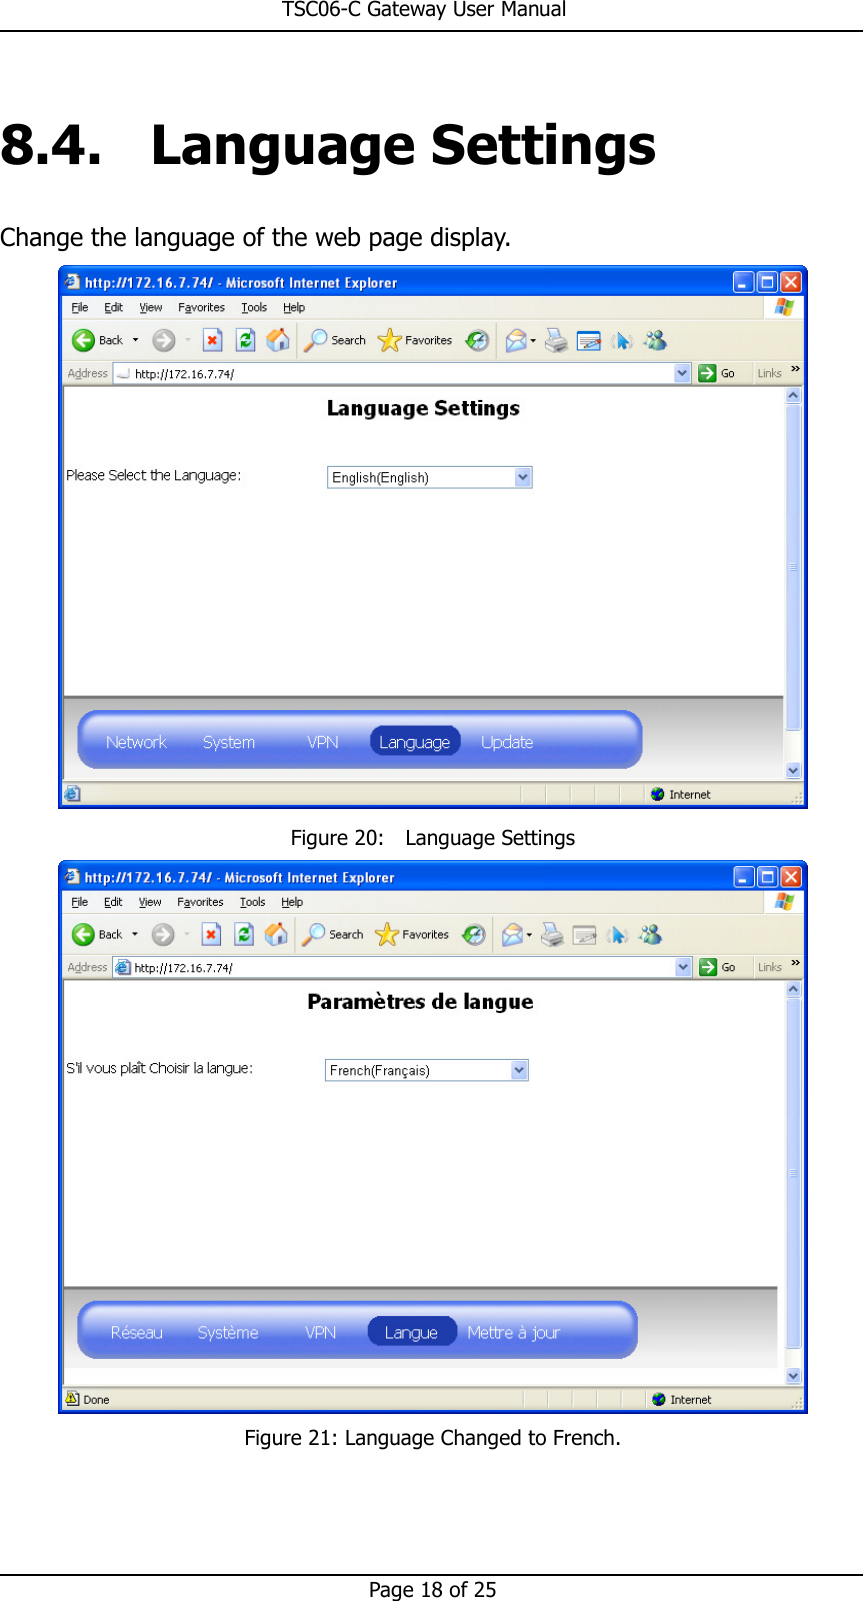                                                       TSC06-C Gateway User Manual   Page 18 of 25  8.4. Language Settings Change the language of the web page display.  Figure 20:    Language Settings  Figure 21: Language Changed to French. 